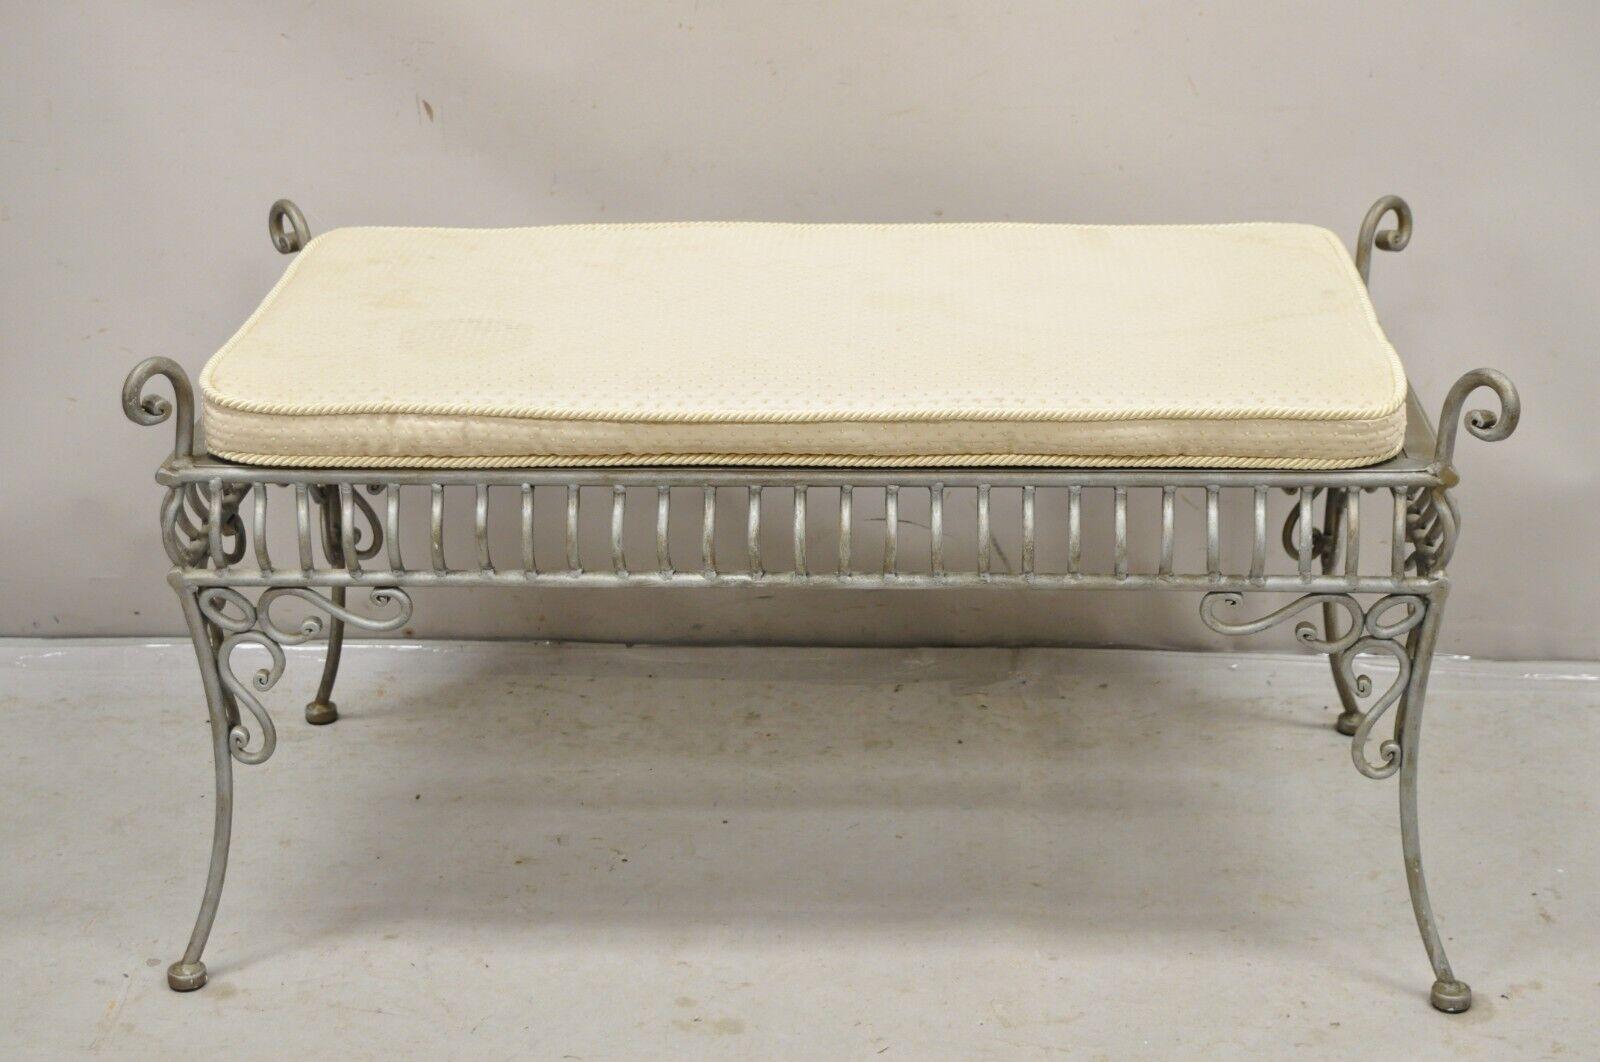 Decorator Wrought Iron Scrolling French Country Style Gray Lattice Bench. Circa Late 20th Century. Measurements: 20